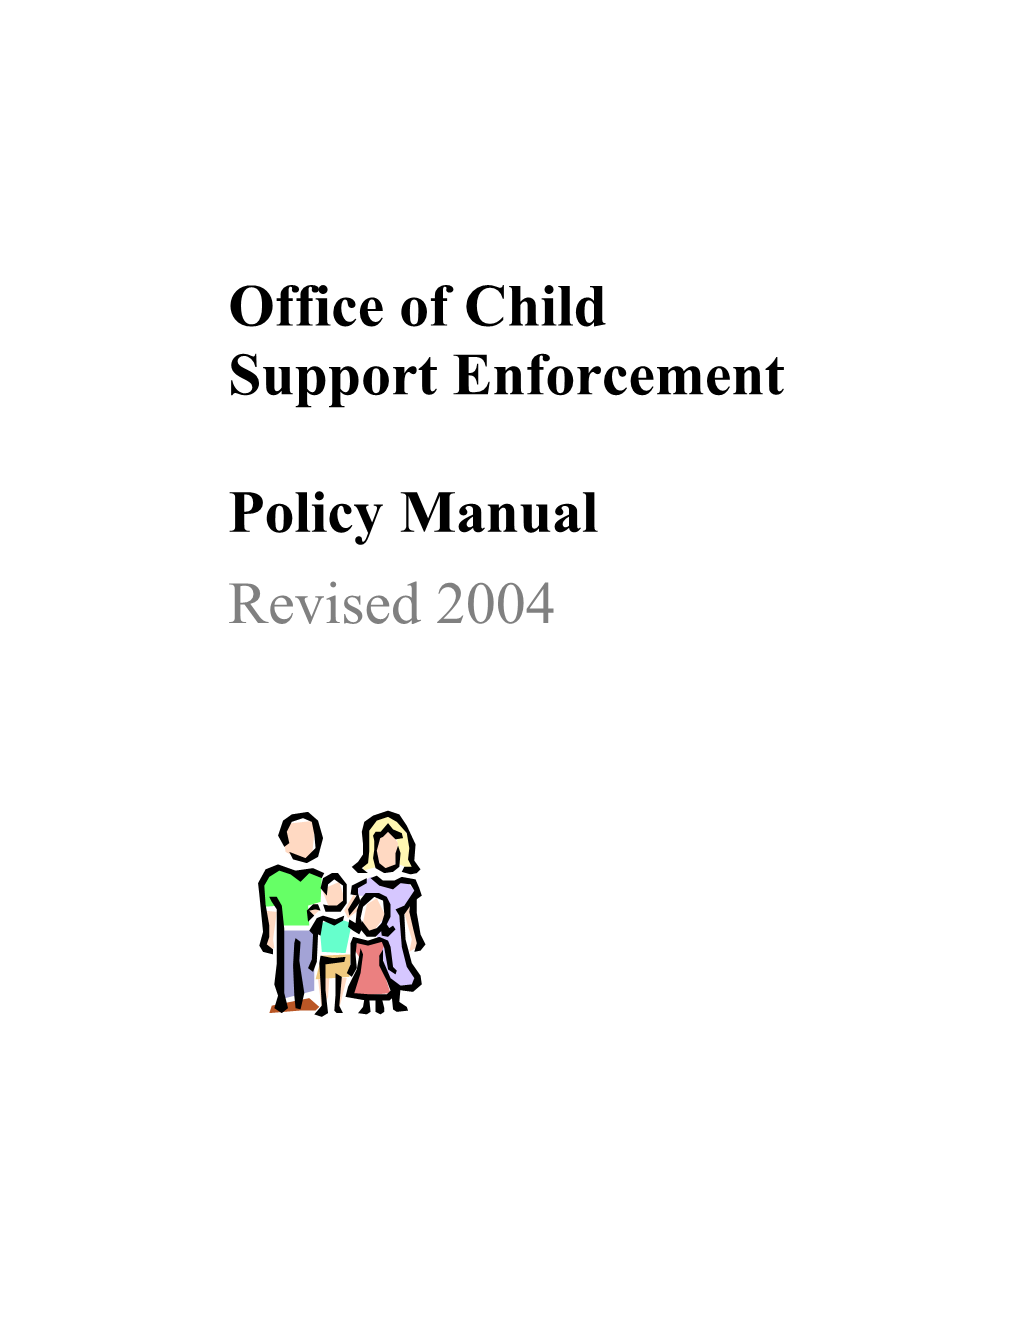 Office of Child Support Enforcement Policy Manual Revised 2004